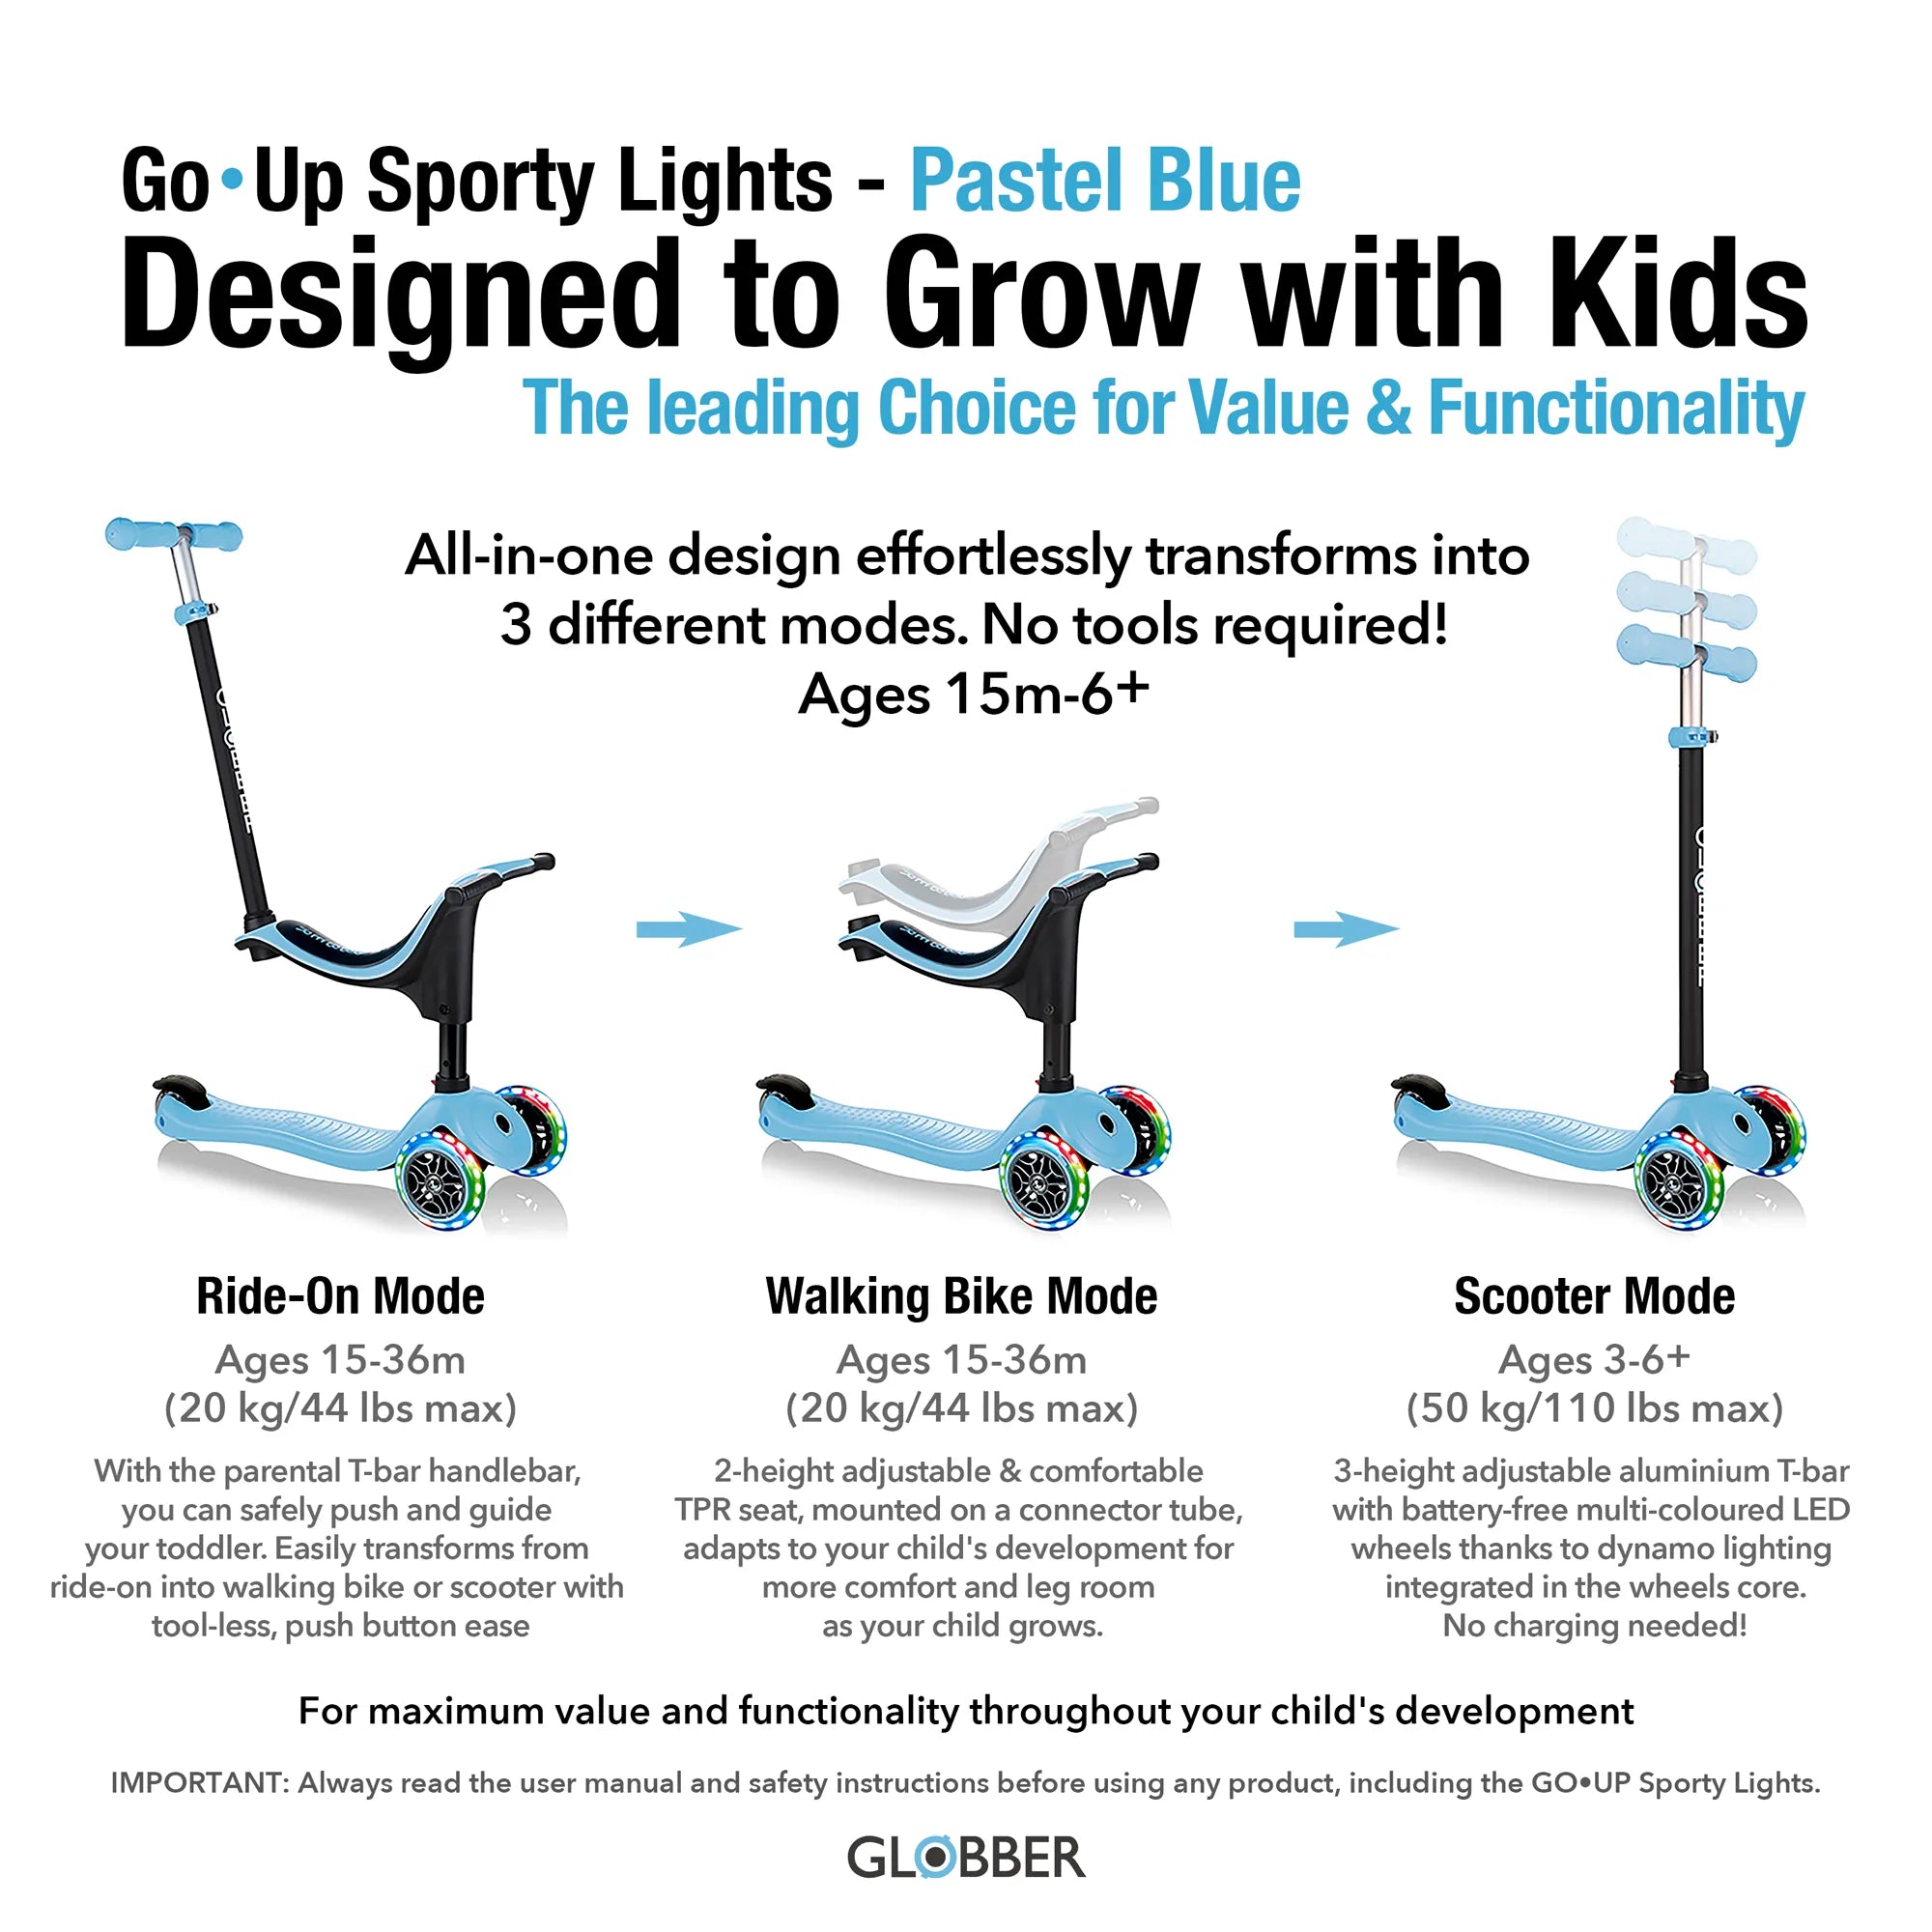 Globber GO•UP Sporty Lights 4-in-1 - Pastel Blue - Ages 15m-6+ yrs - Brown's Hobby & Game